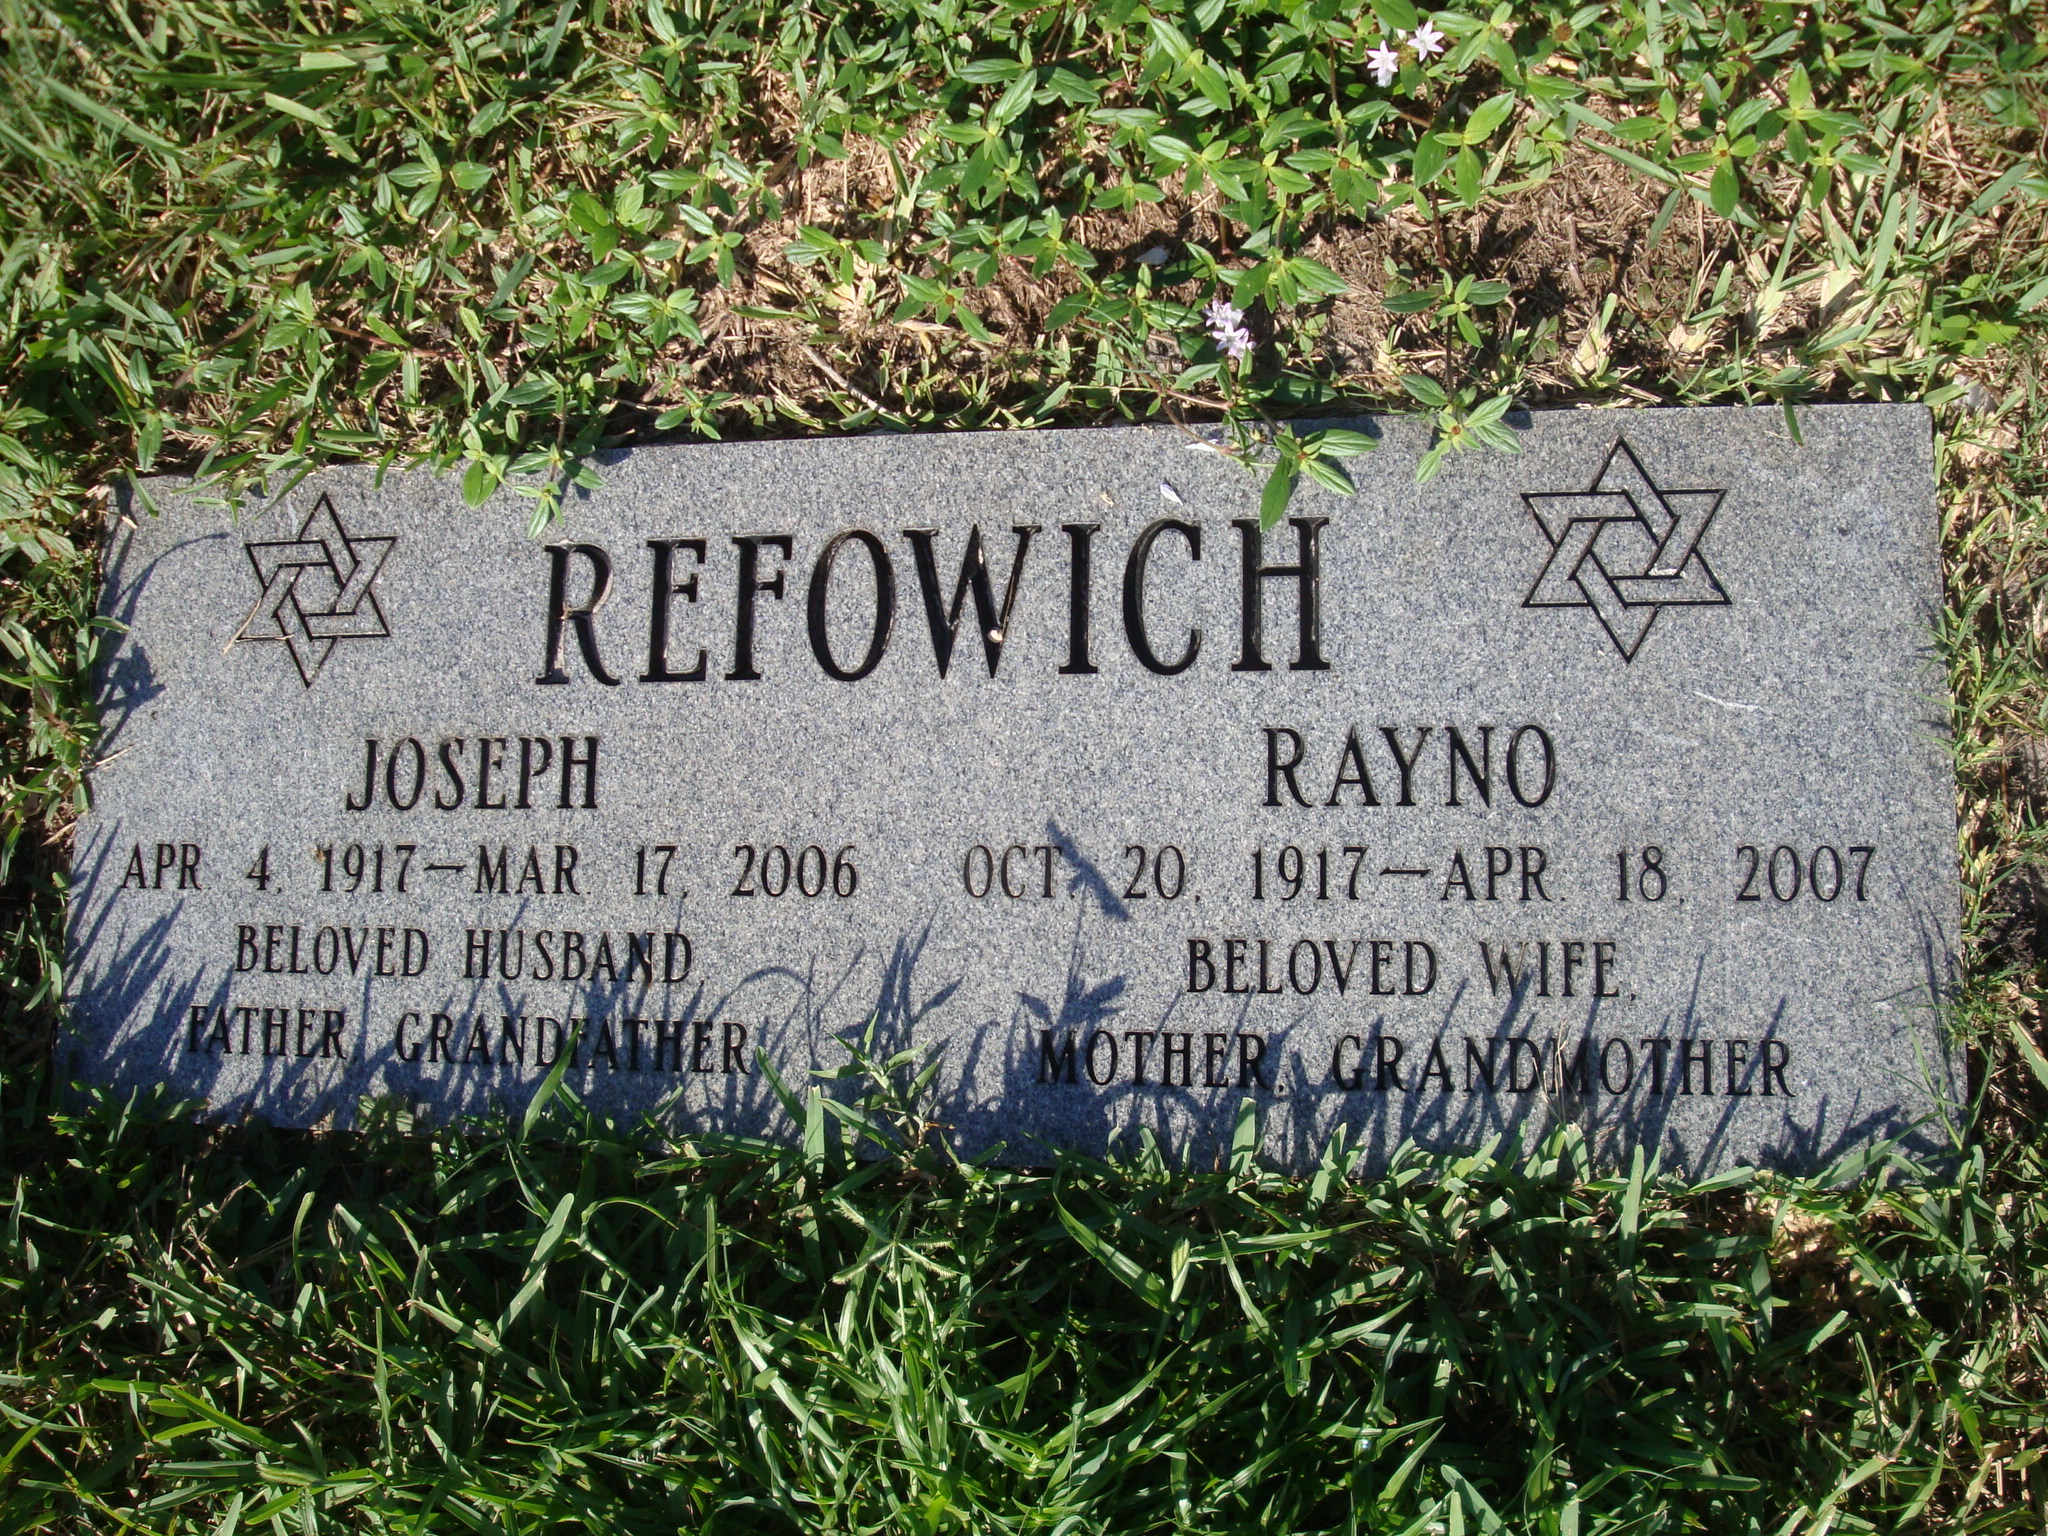 Rayno Refowich